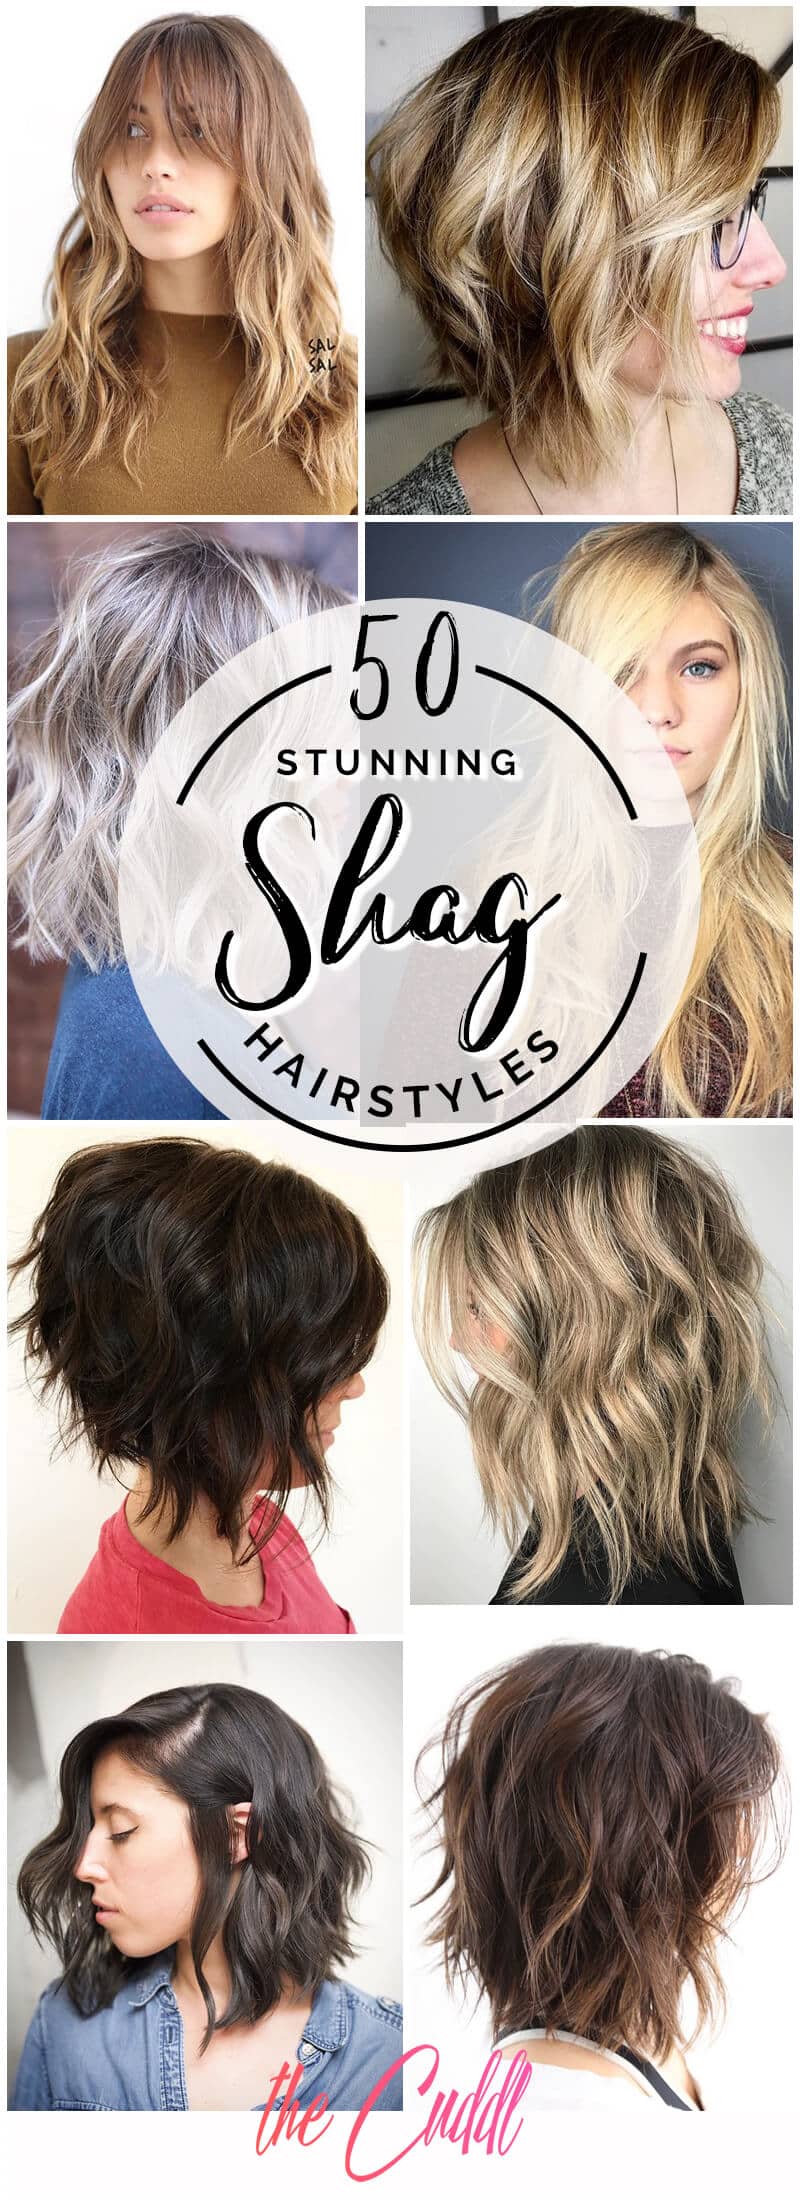 50 Ways To Wear a Chic Shag Haircut For a Trendy Look